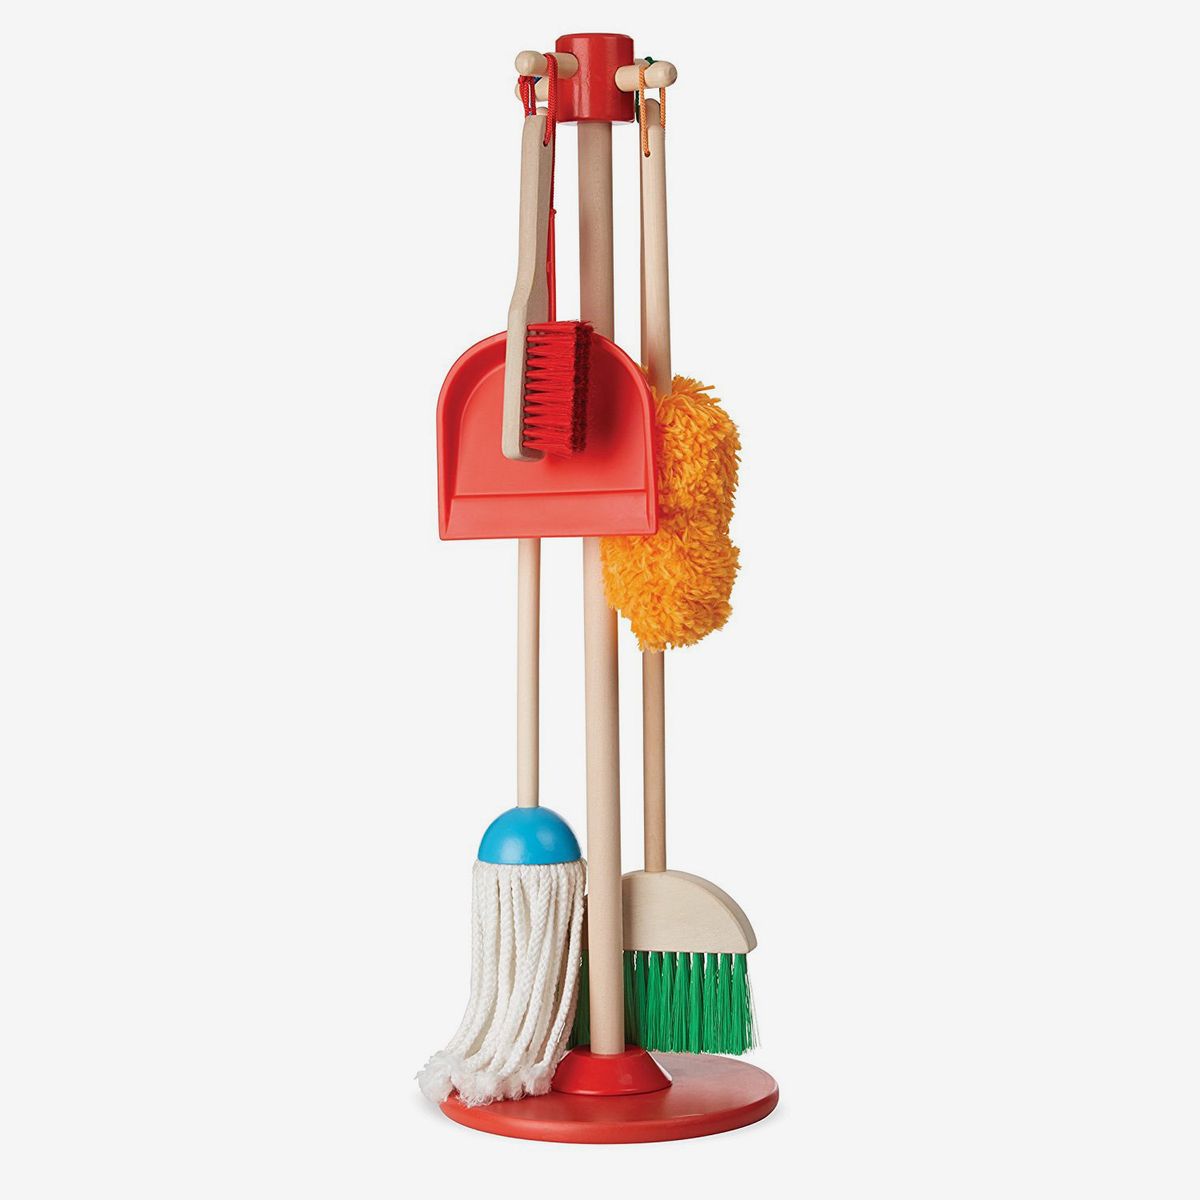 NEW RED GORILLA BROOM BRIGHT HORSE STABLE GARDEN FARM HOUSE CLEAN BROOM SWEEP 